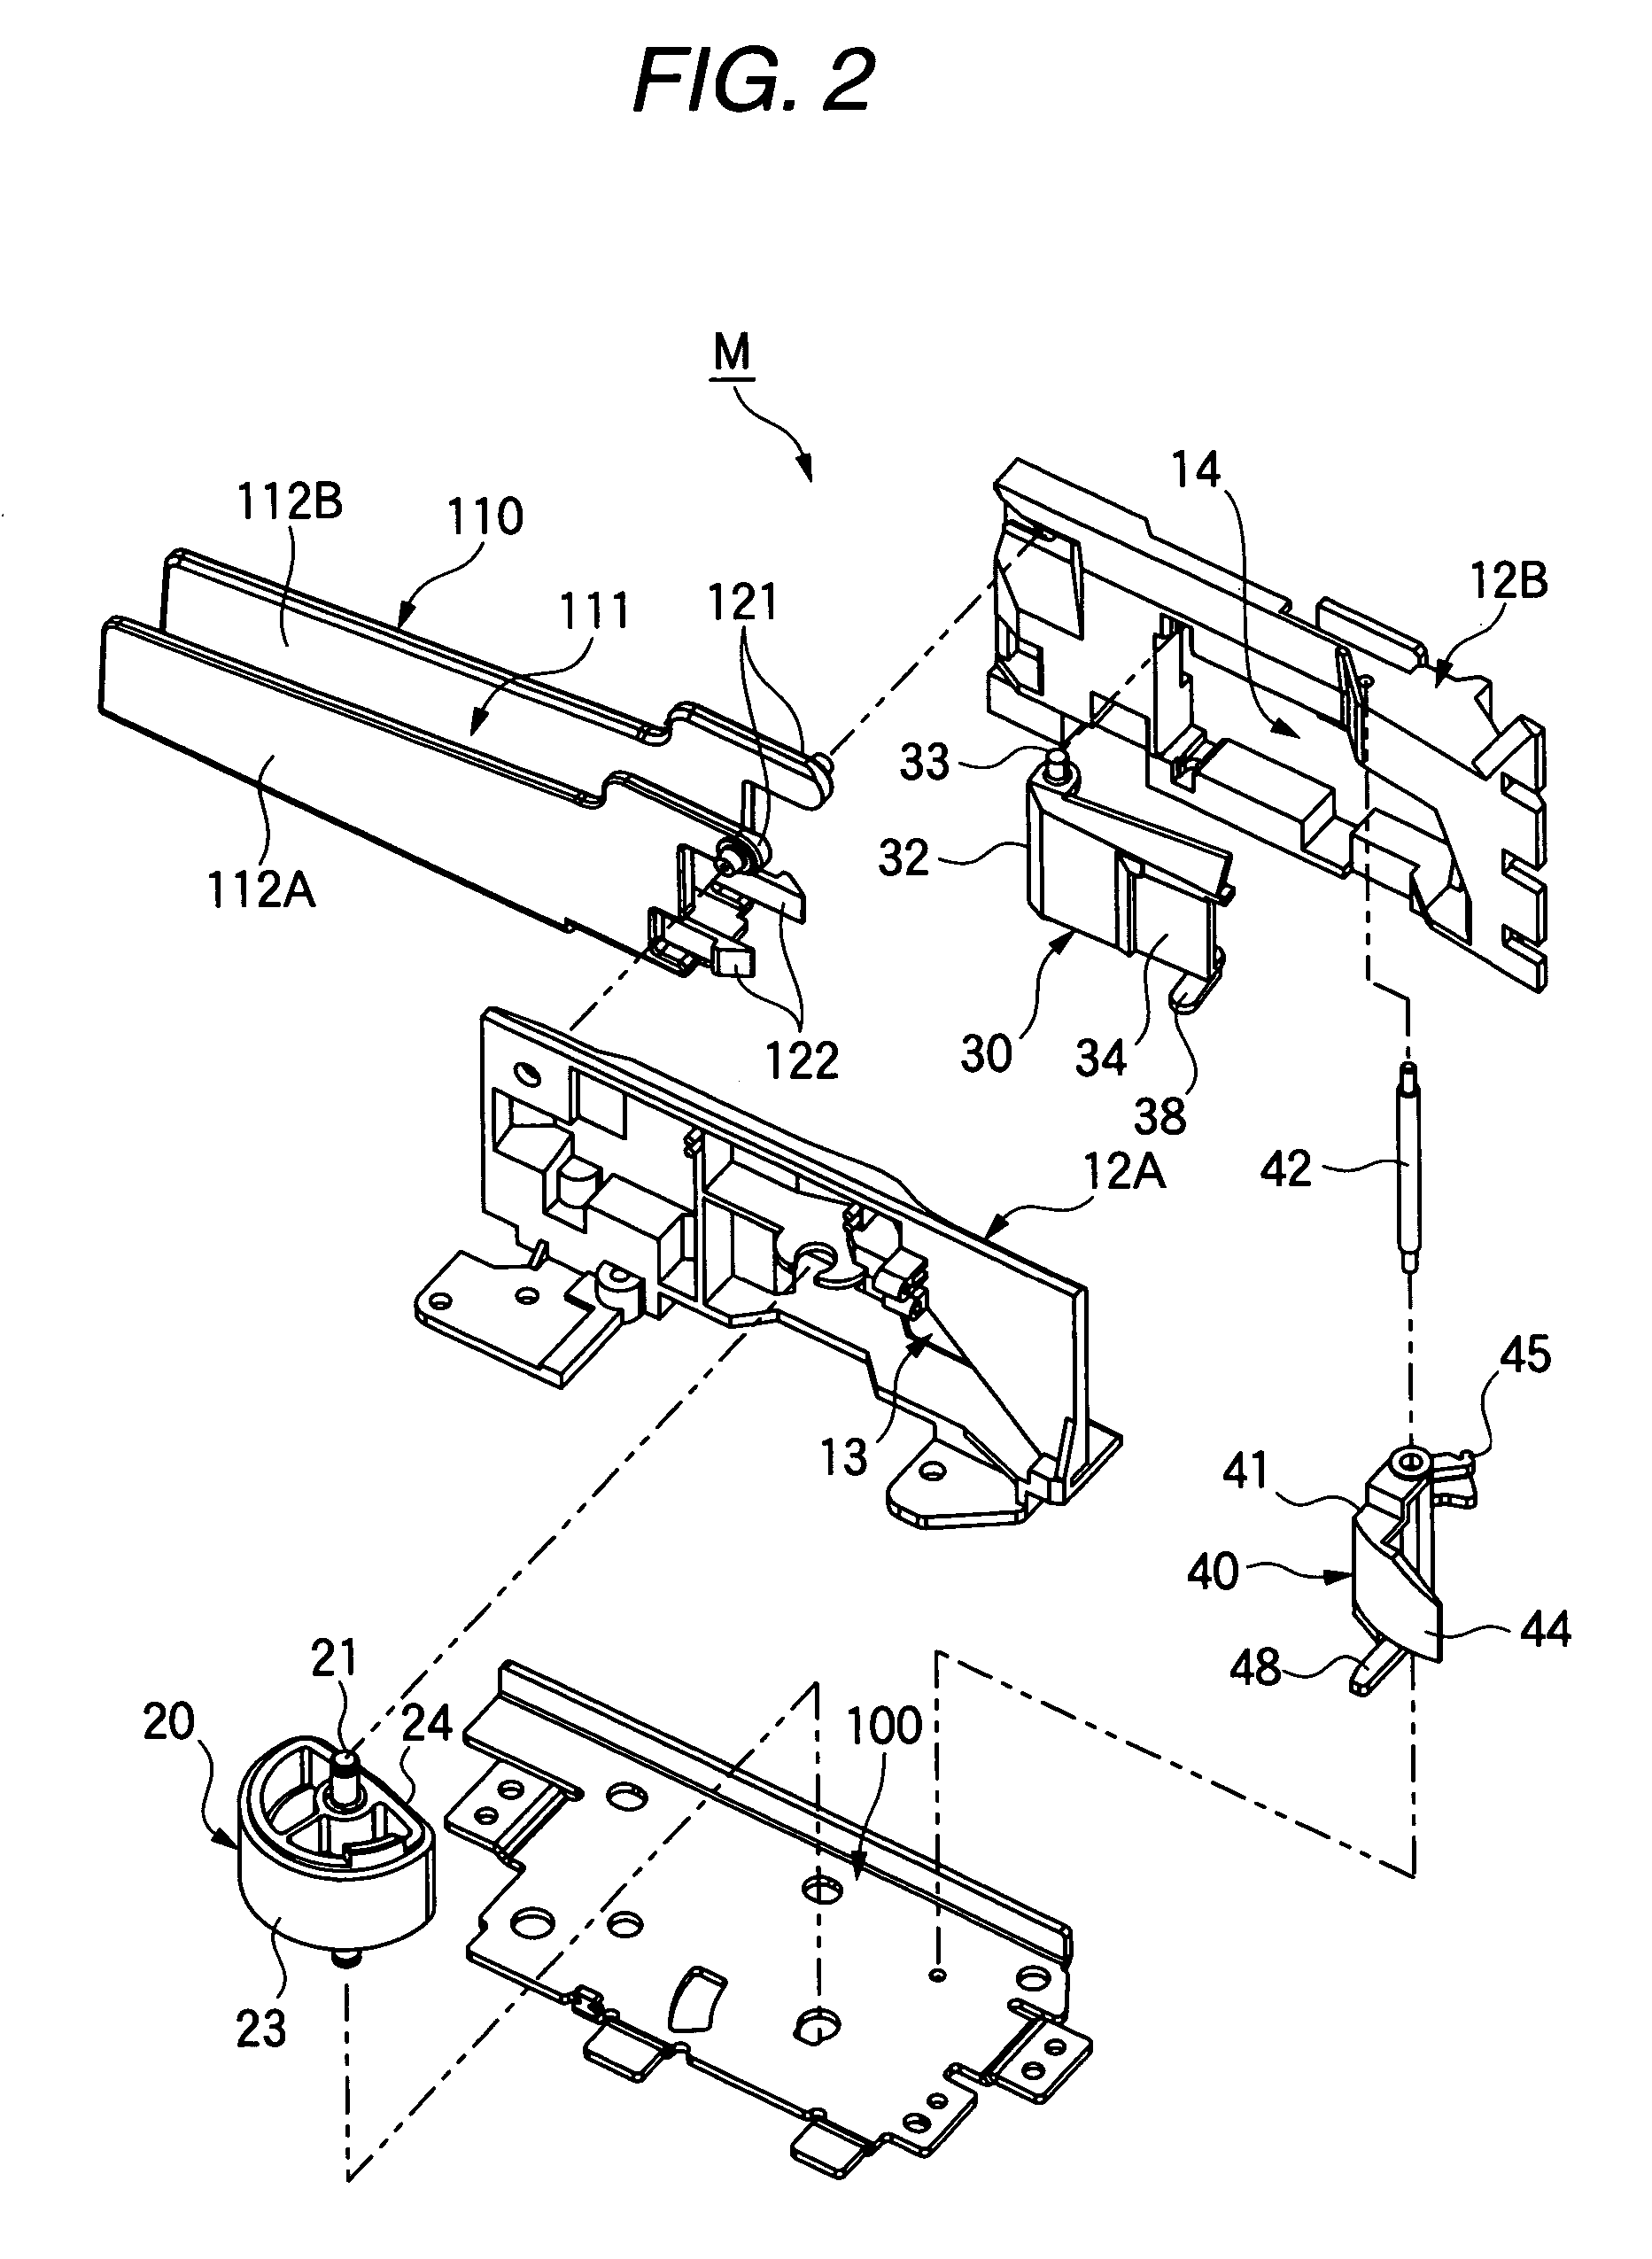 Sheet feeding device with variable faced roller and integrated sheet guides